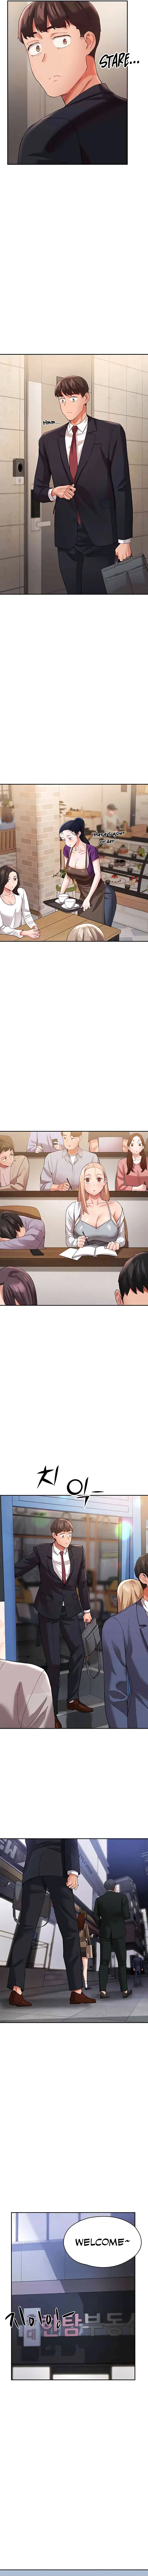 living-with-two-busty-women-chap-37-1